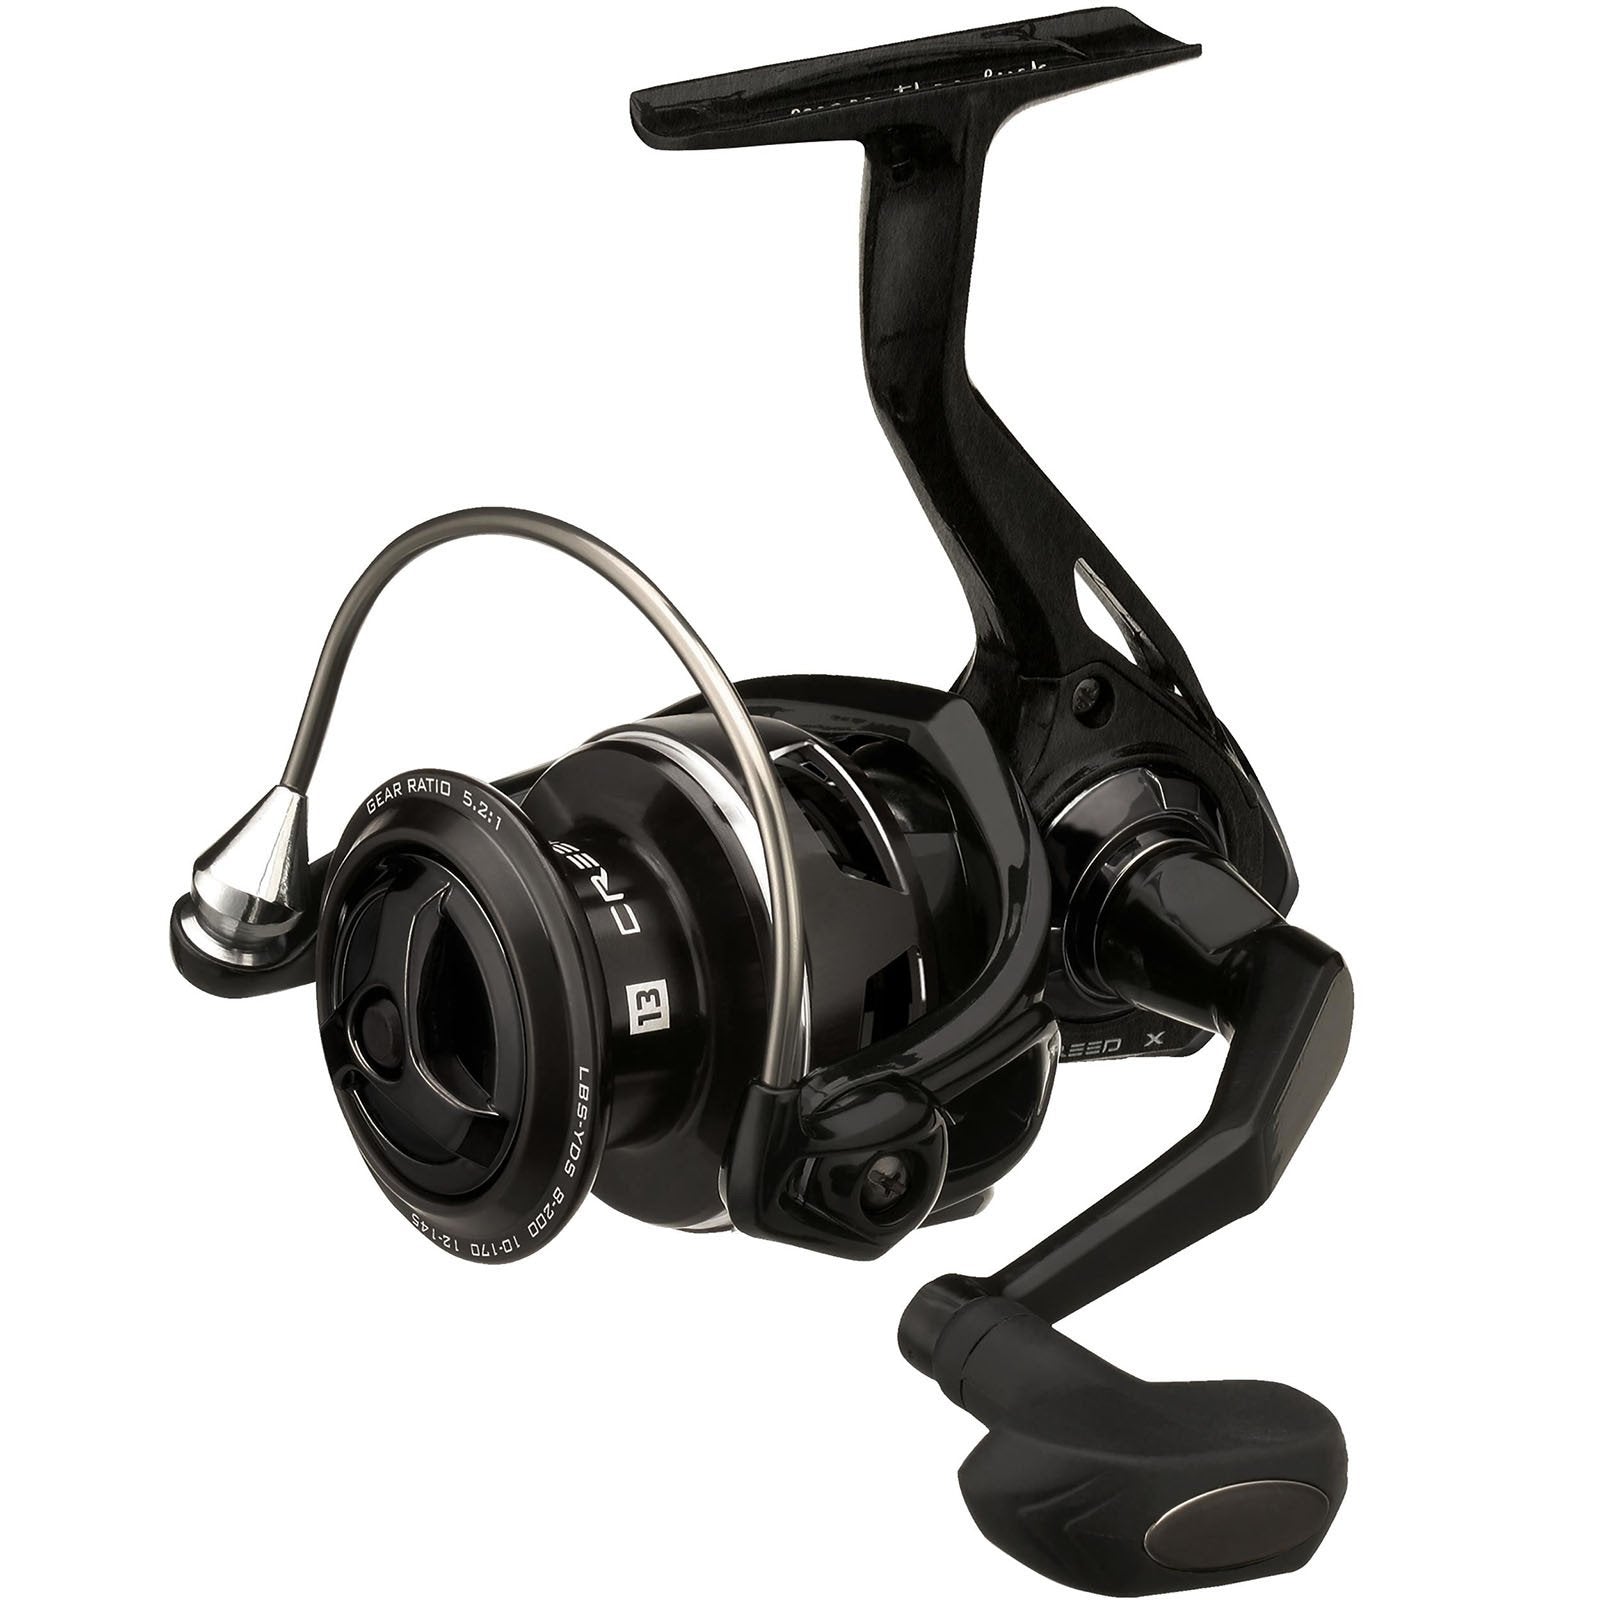 13 Fishing Blackout/Creed GT - 7'1 M Spinning Combo - Andy